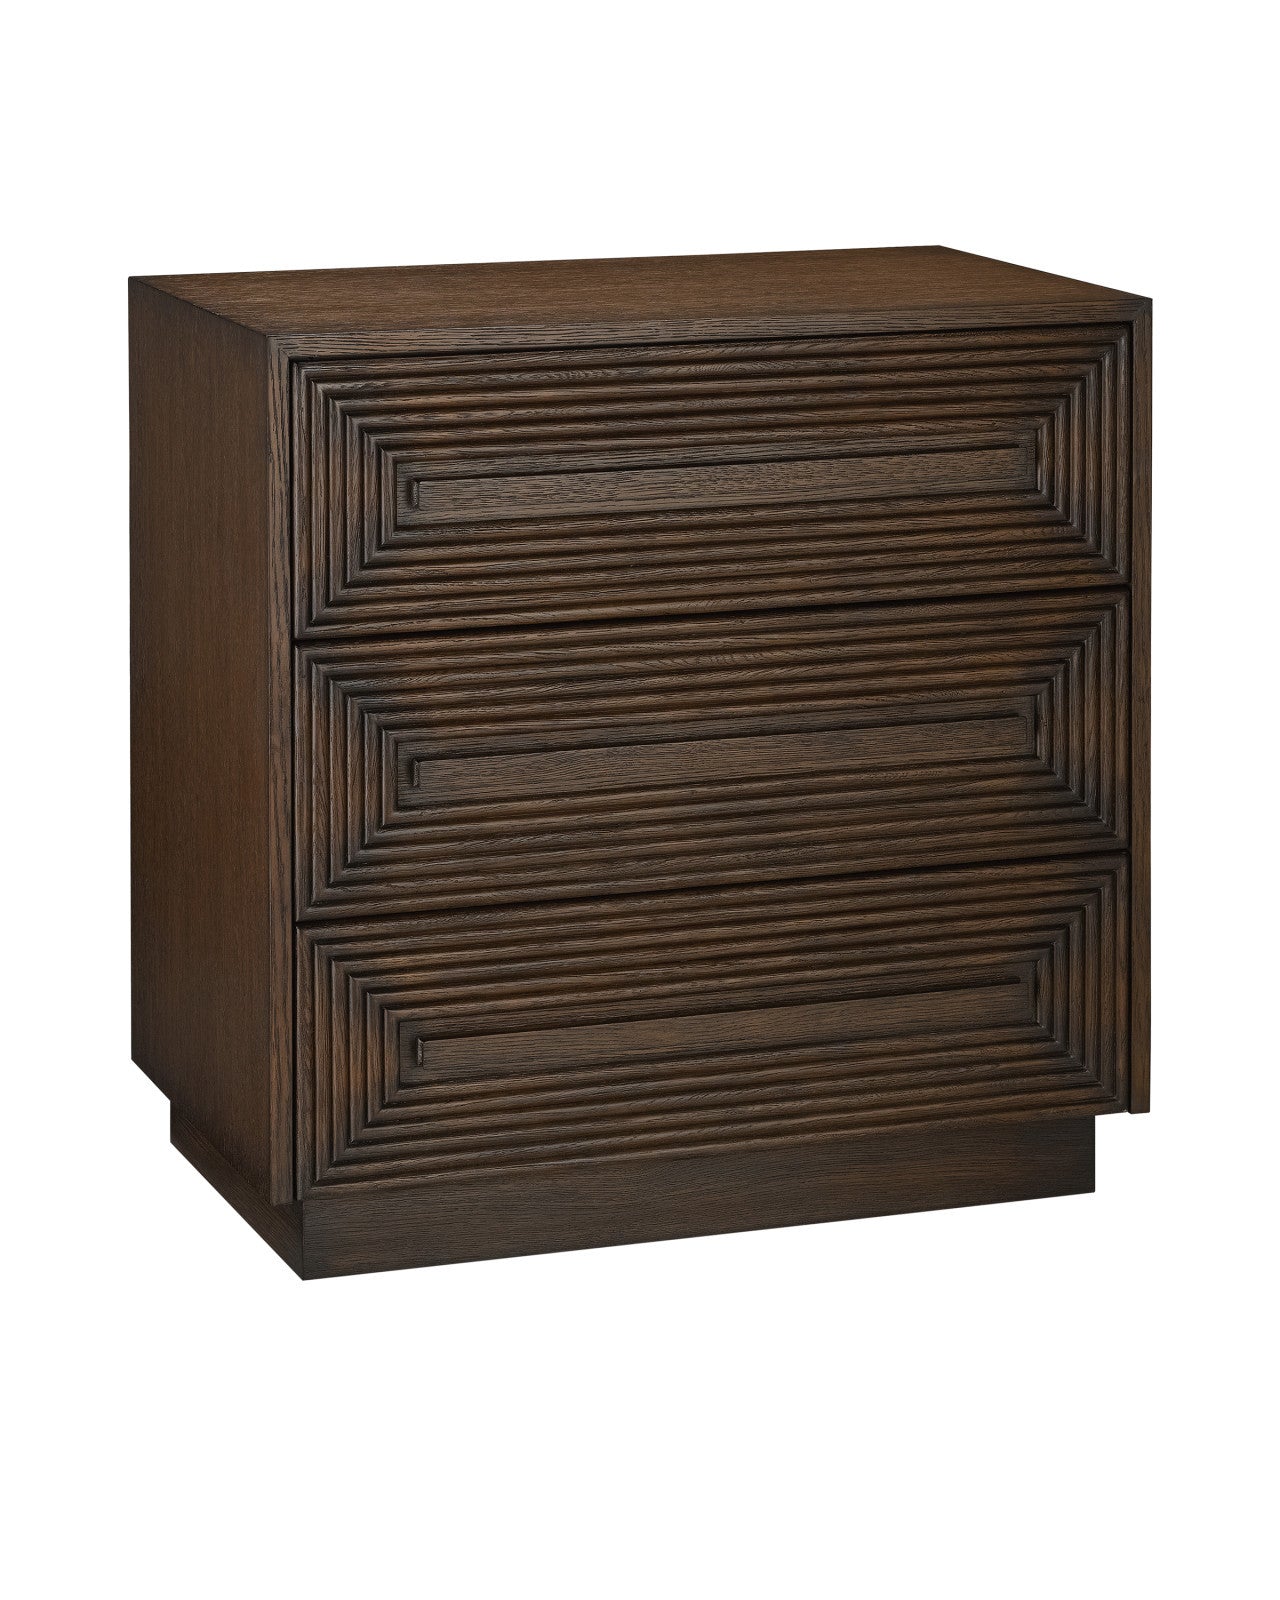 Morombe Cocoa Chest by Currey & Co.